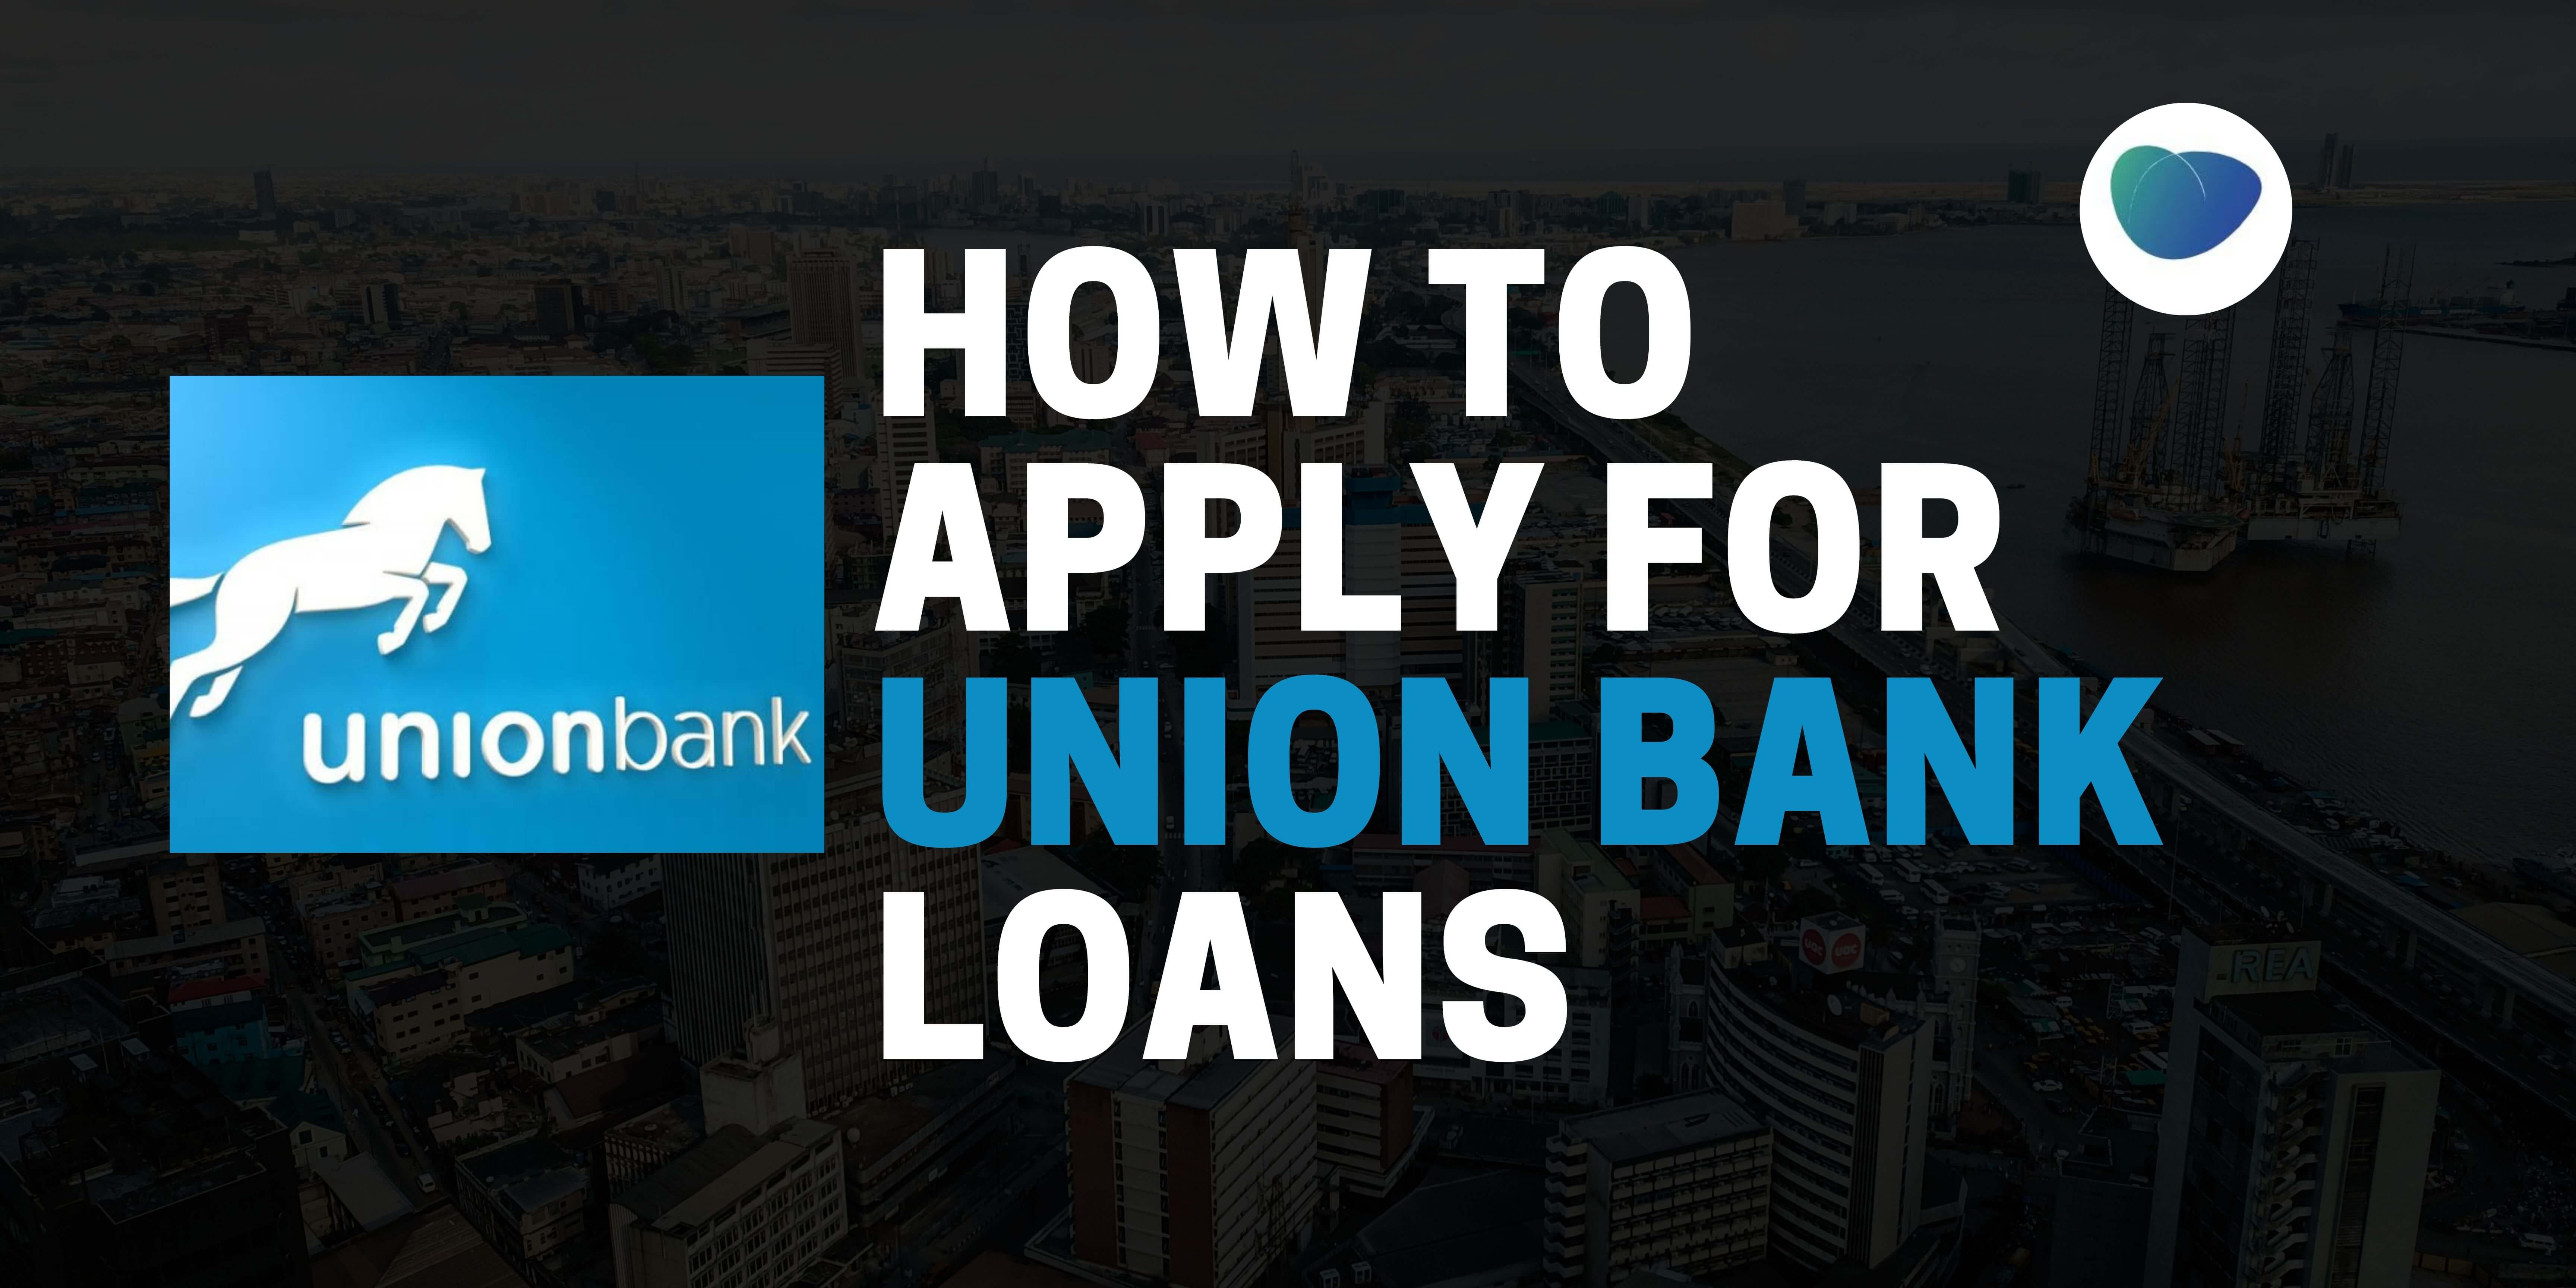 How to get a loan from Union Bank - LoanSpot